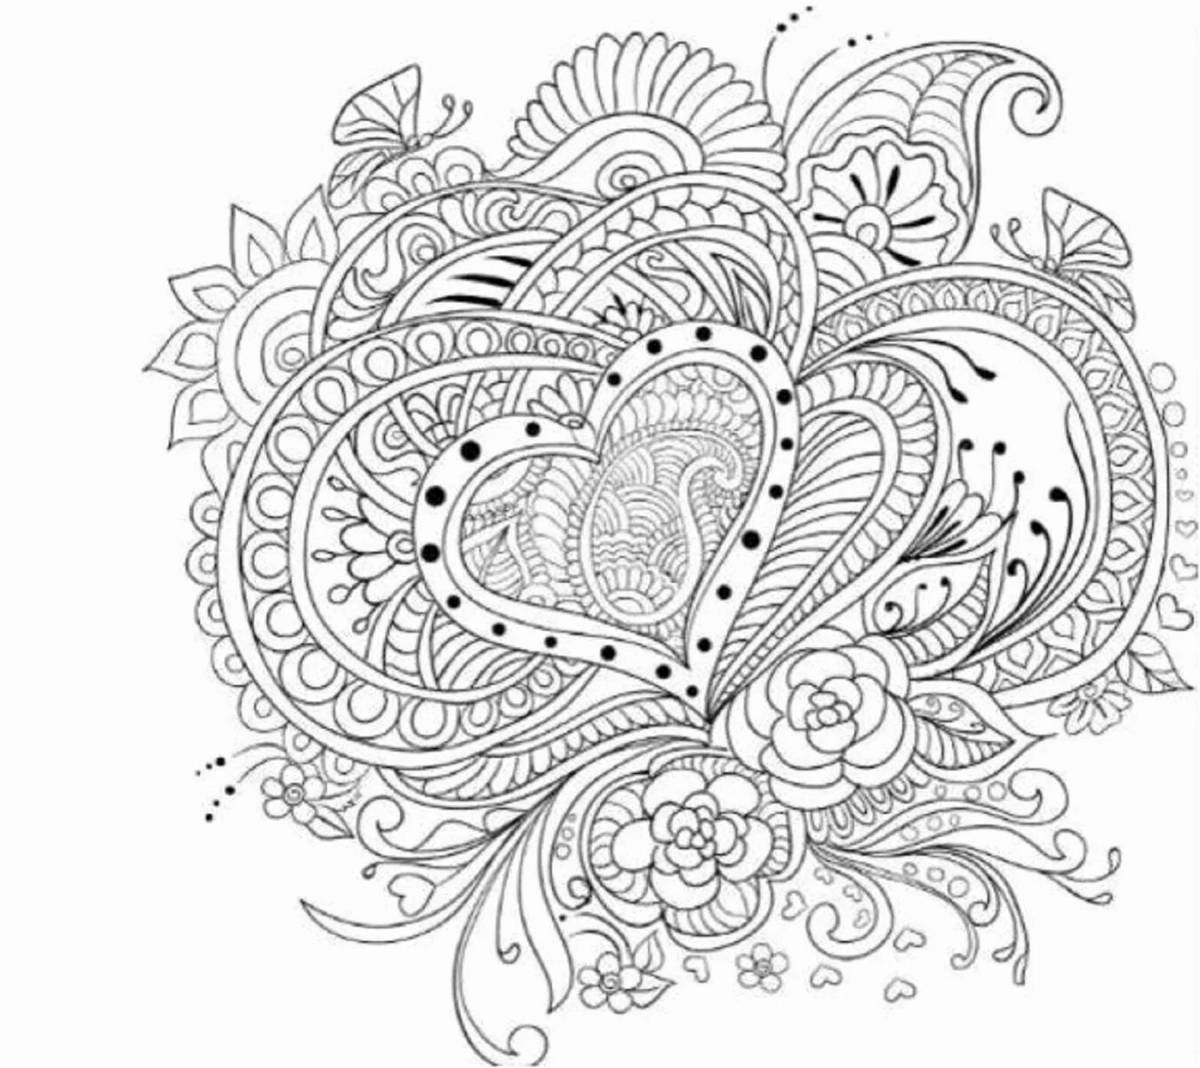 Coloring book glowing love antistress